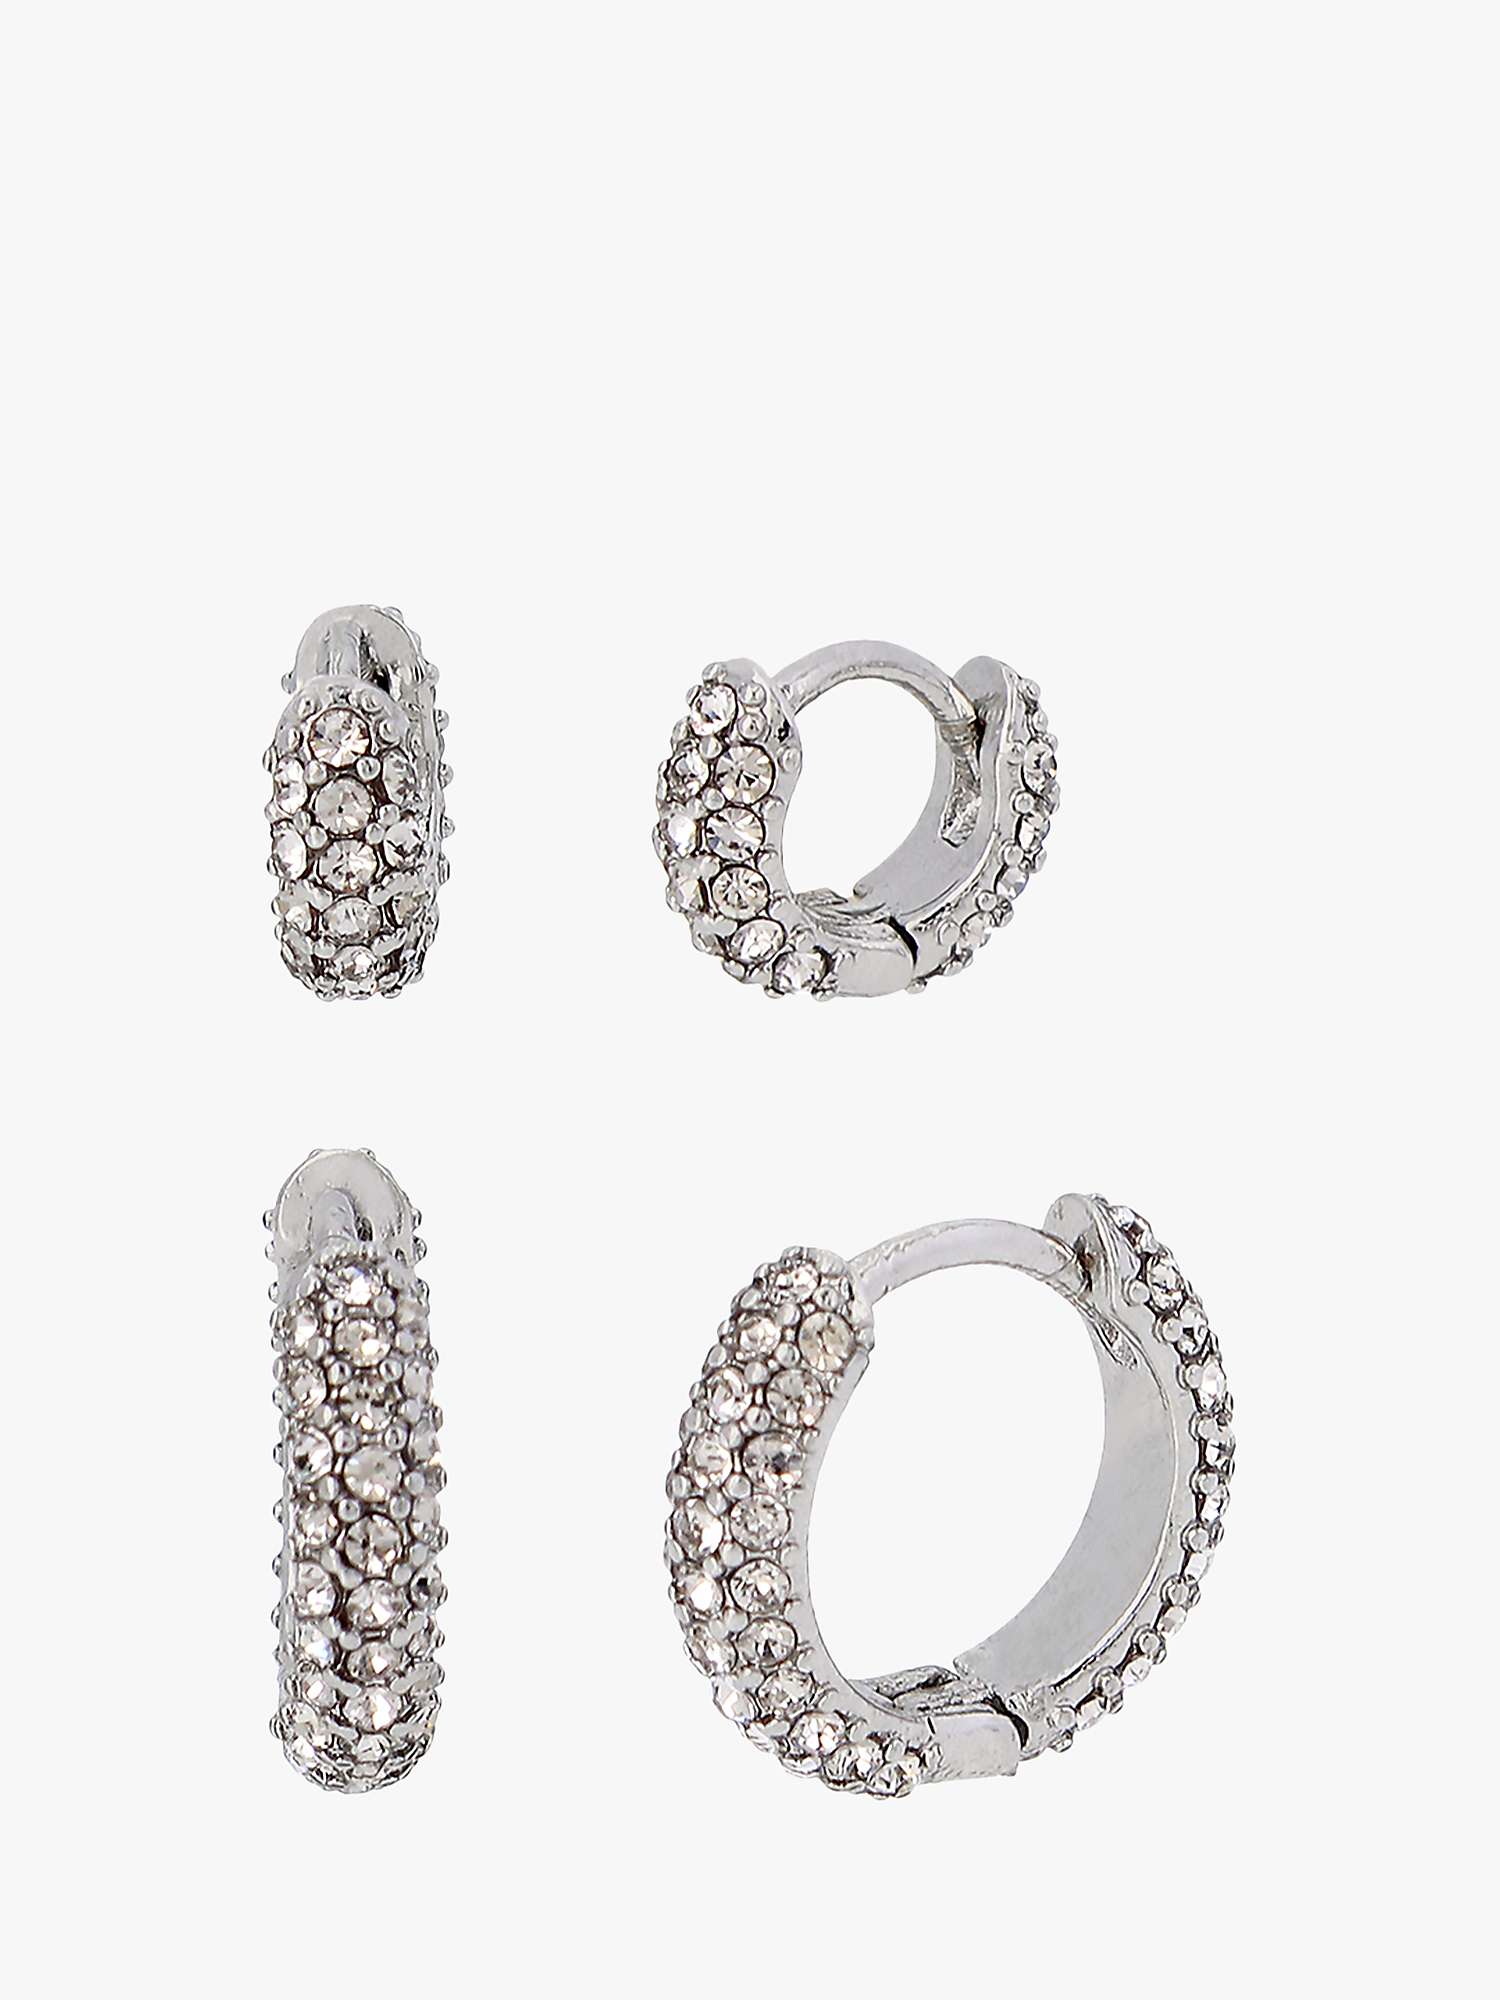 Buy AllSaints Crystal Mini and Small Hoop Earrings, Set of 2, Silver Online at johnlewis.com